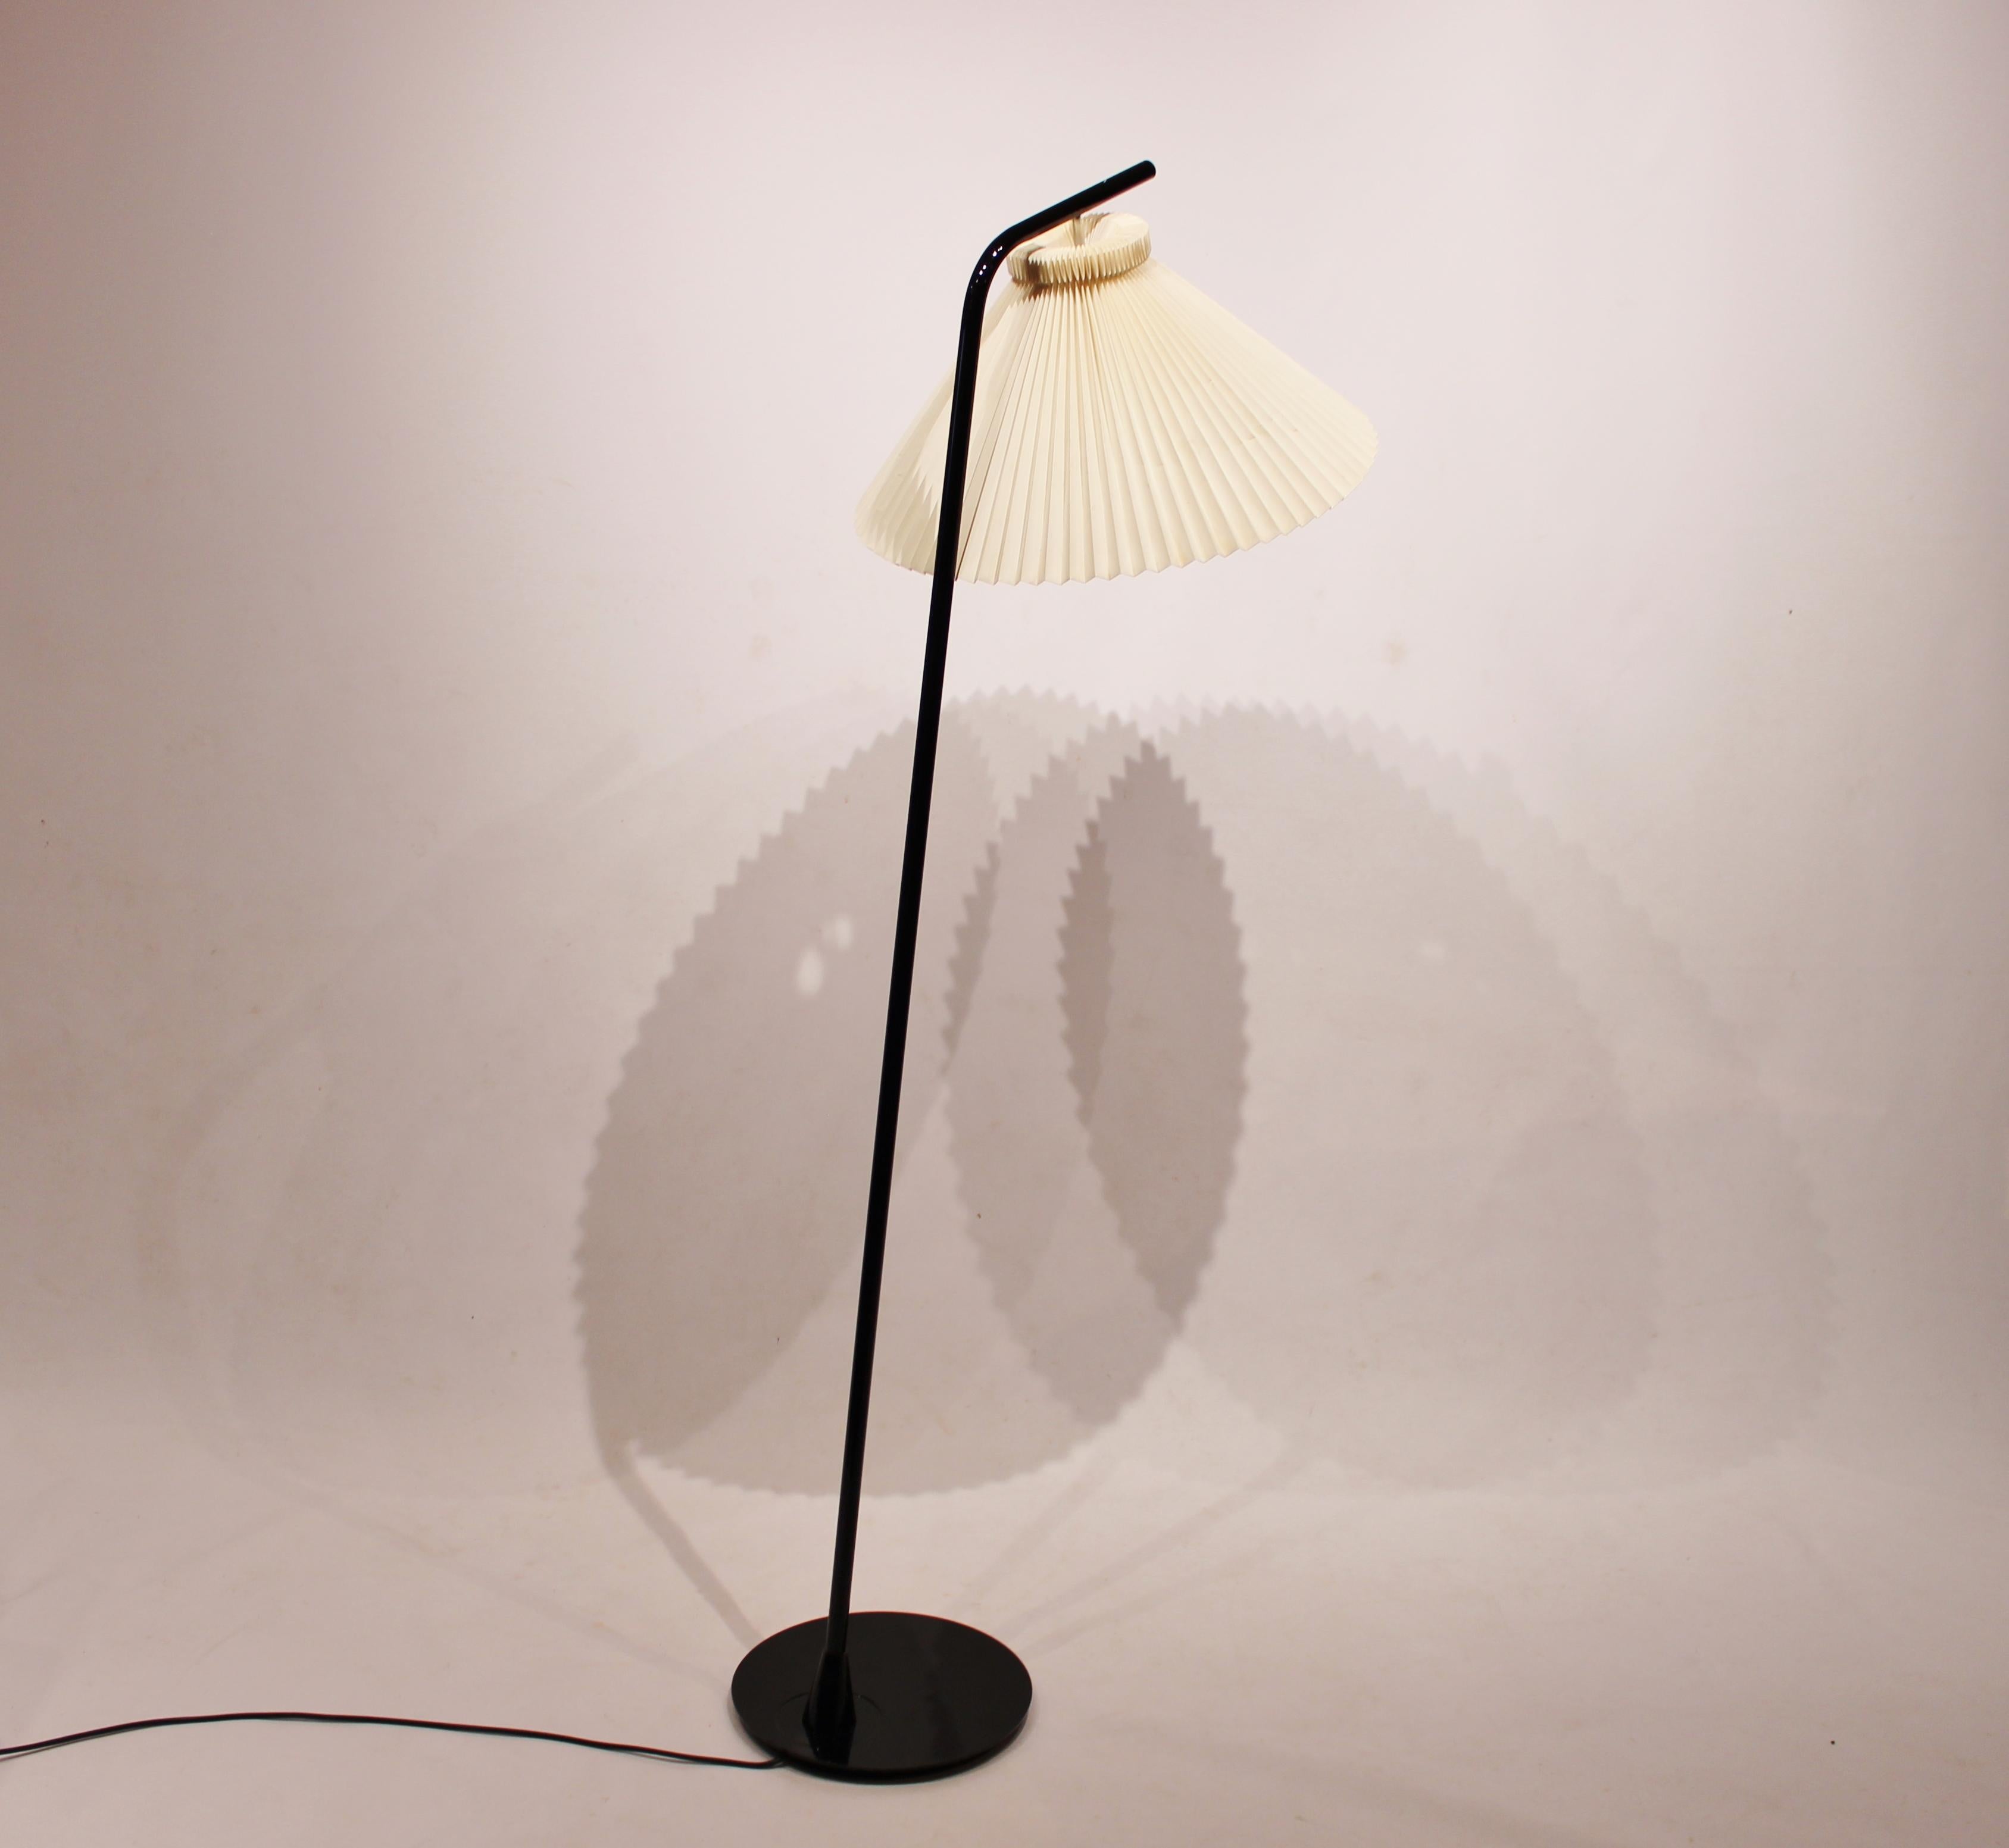 Scandinavian Modern Floor Lamp of Danish Design from the 1980s with Shade by Le Klint